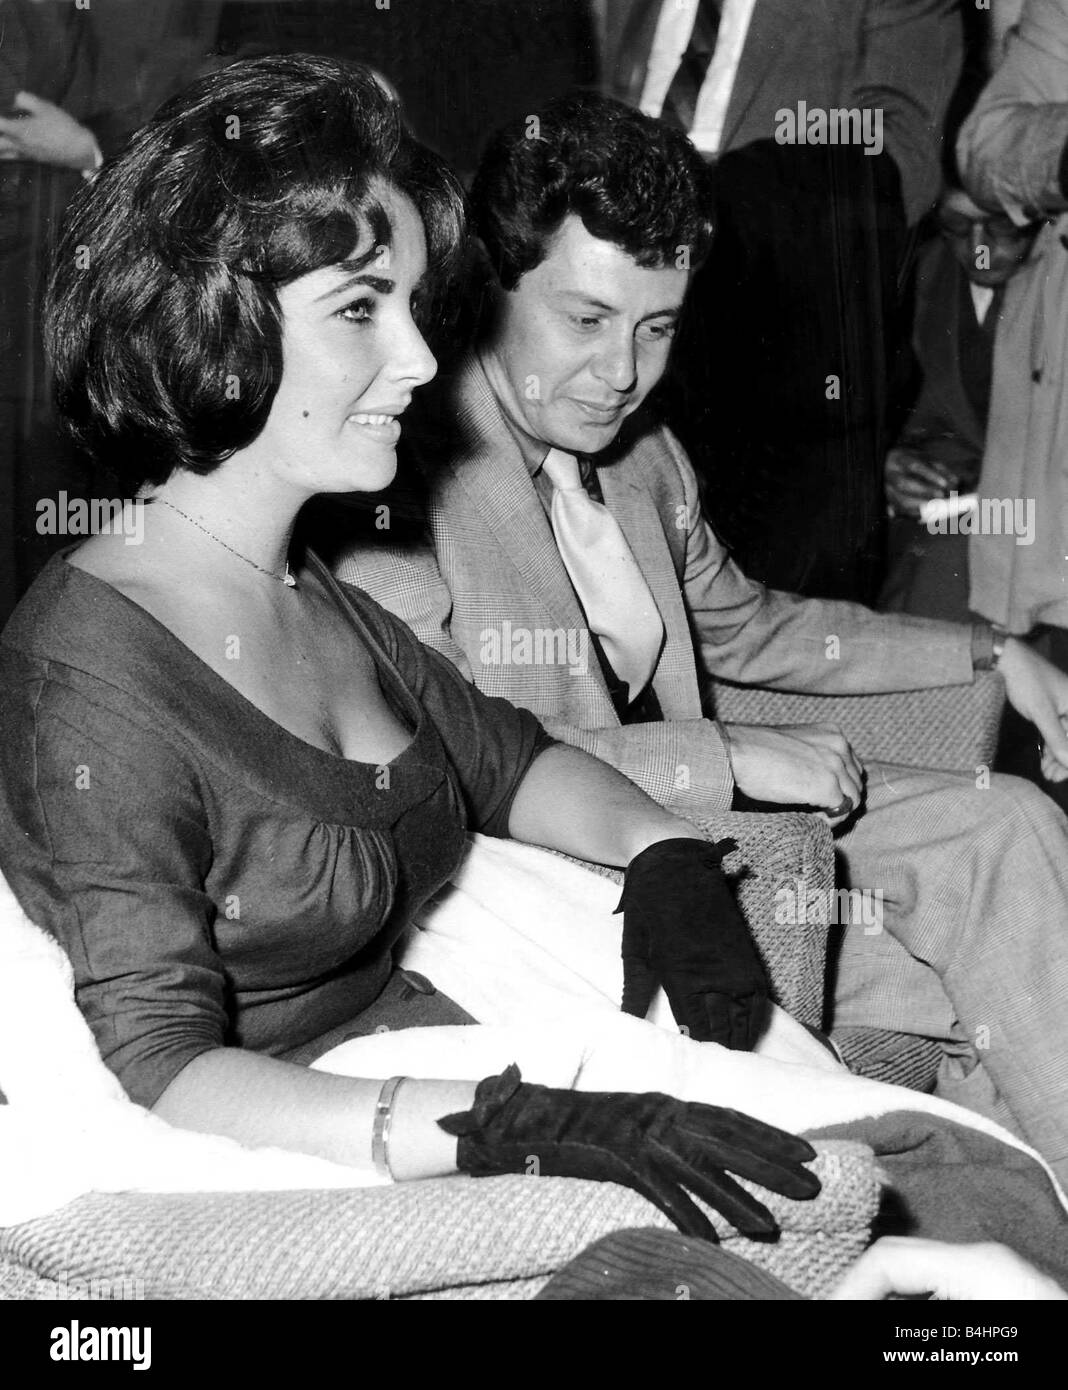 Eddie Fisher With Wife Elizabeth Taylor Actress At London Airport Where They Are Being Interviewed By The Worlds Media DBase Stock Photo